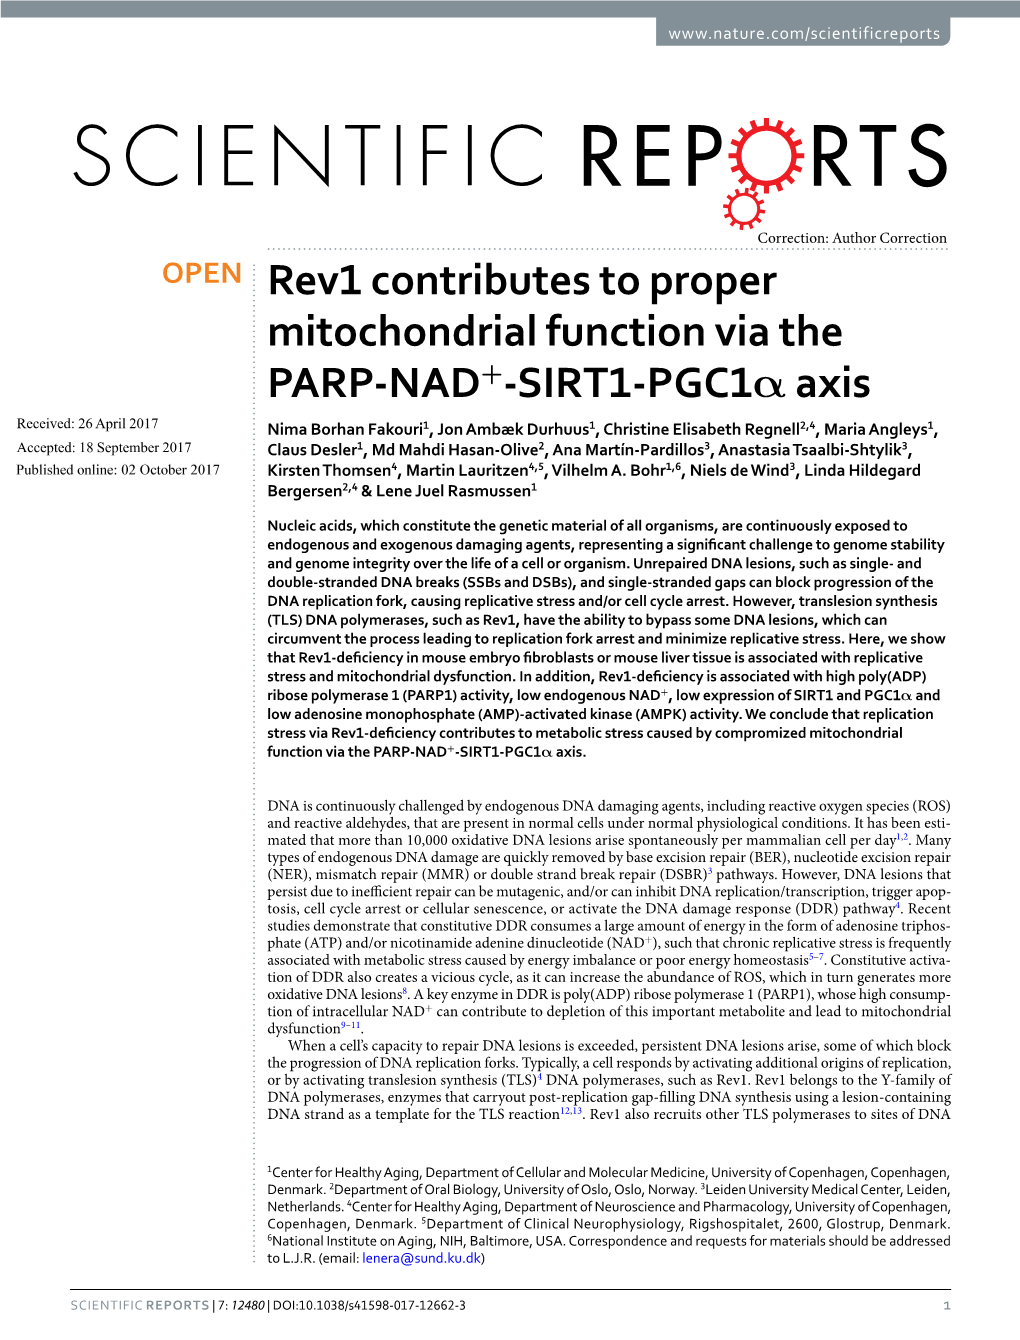 Rev1 Contributes to Proper Mitochondrial Function Via the PARP